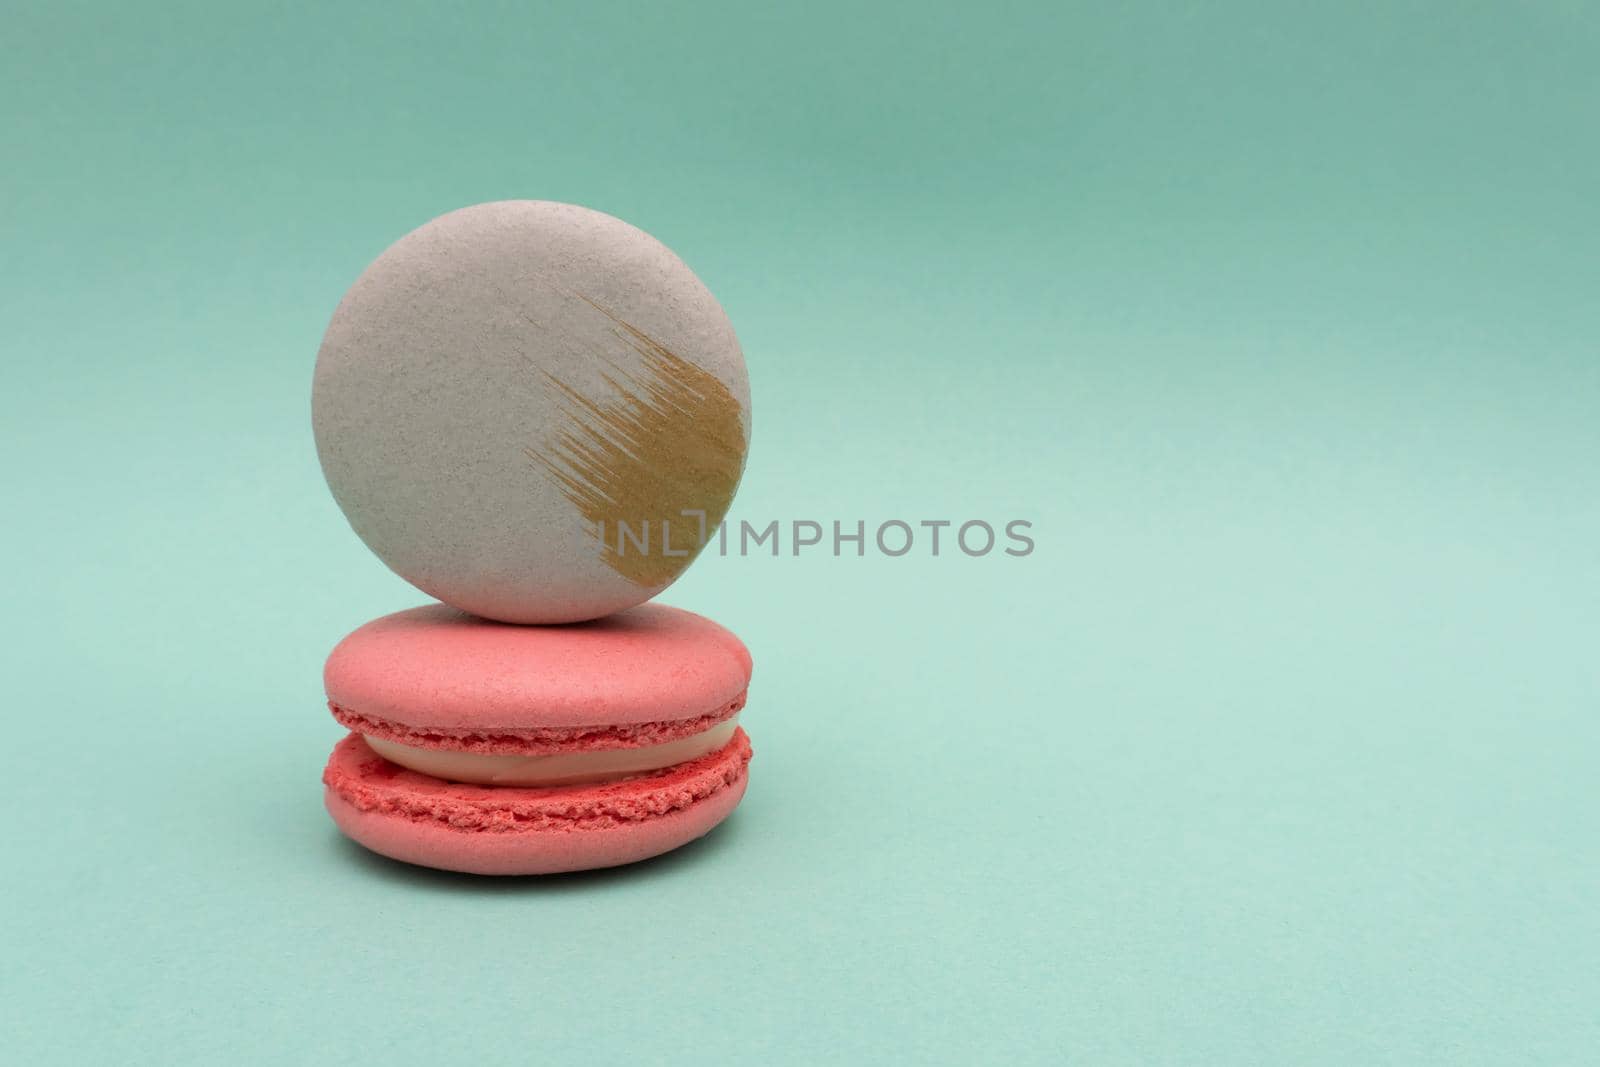 Grey macaron stand on pink strawberry macaroon on mint or turquoise background by uveita